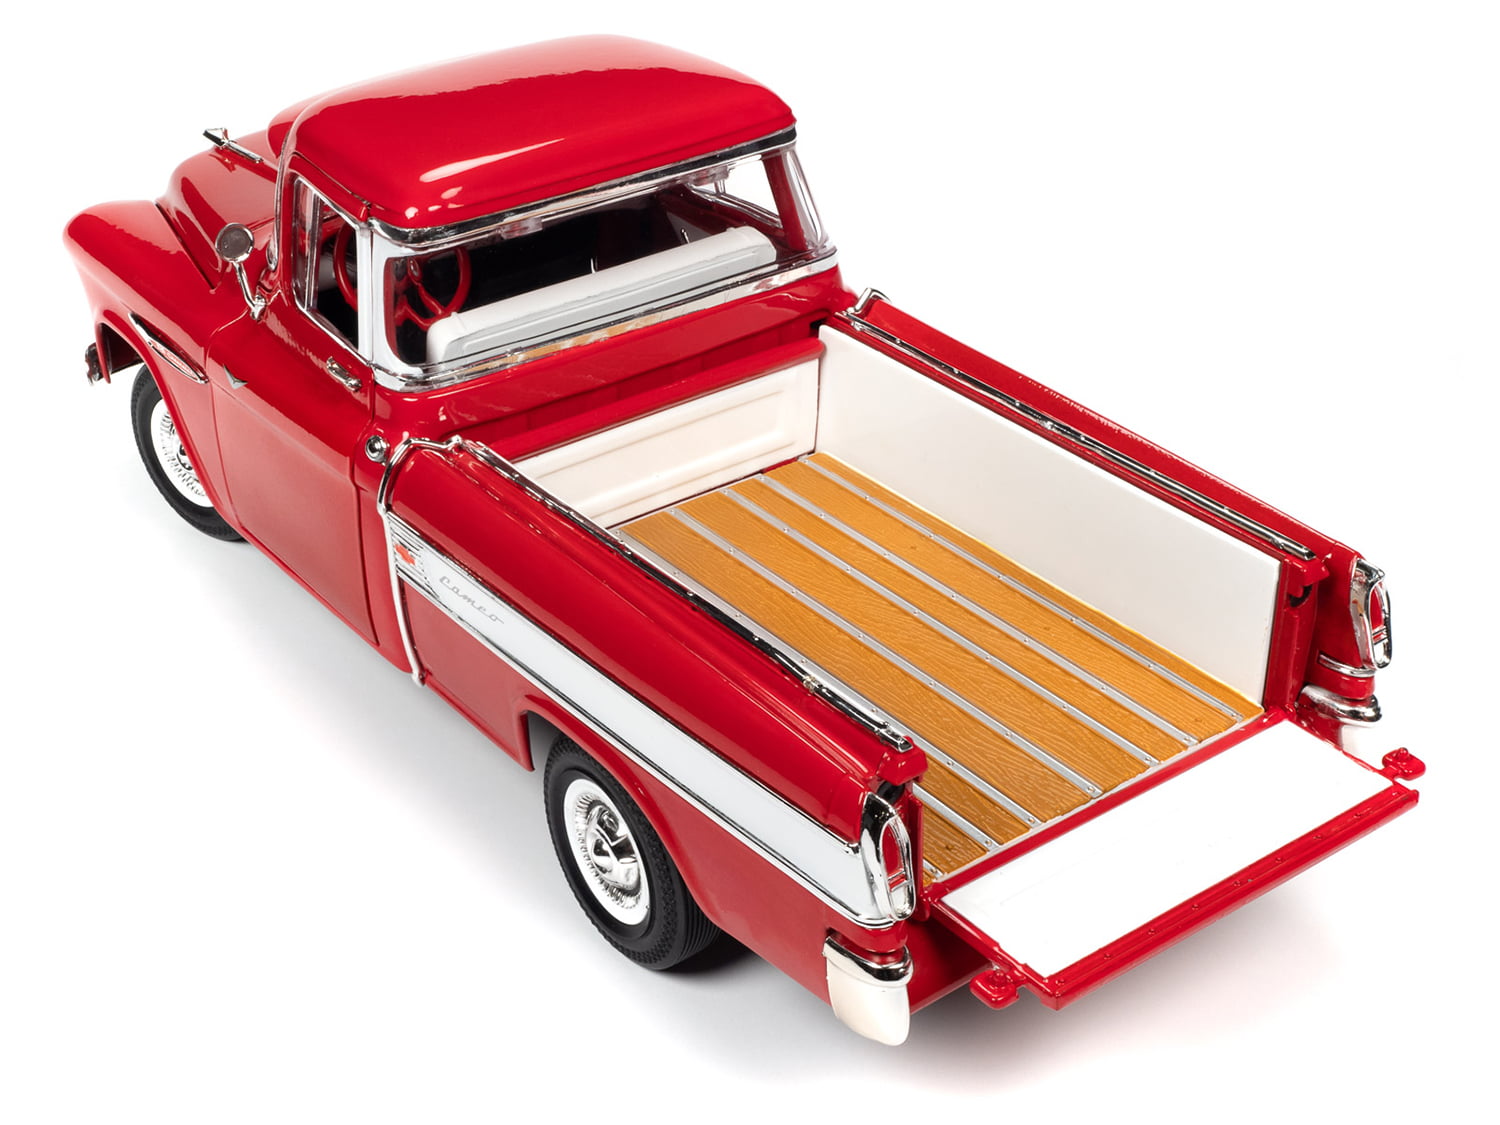 1957 Chevrolet Cameo Pickup Red in 1 18 Scale by Auto World AW265 for sale online 